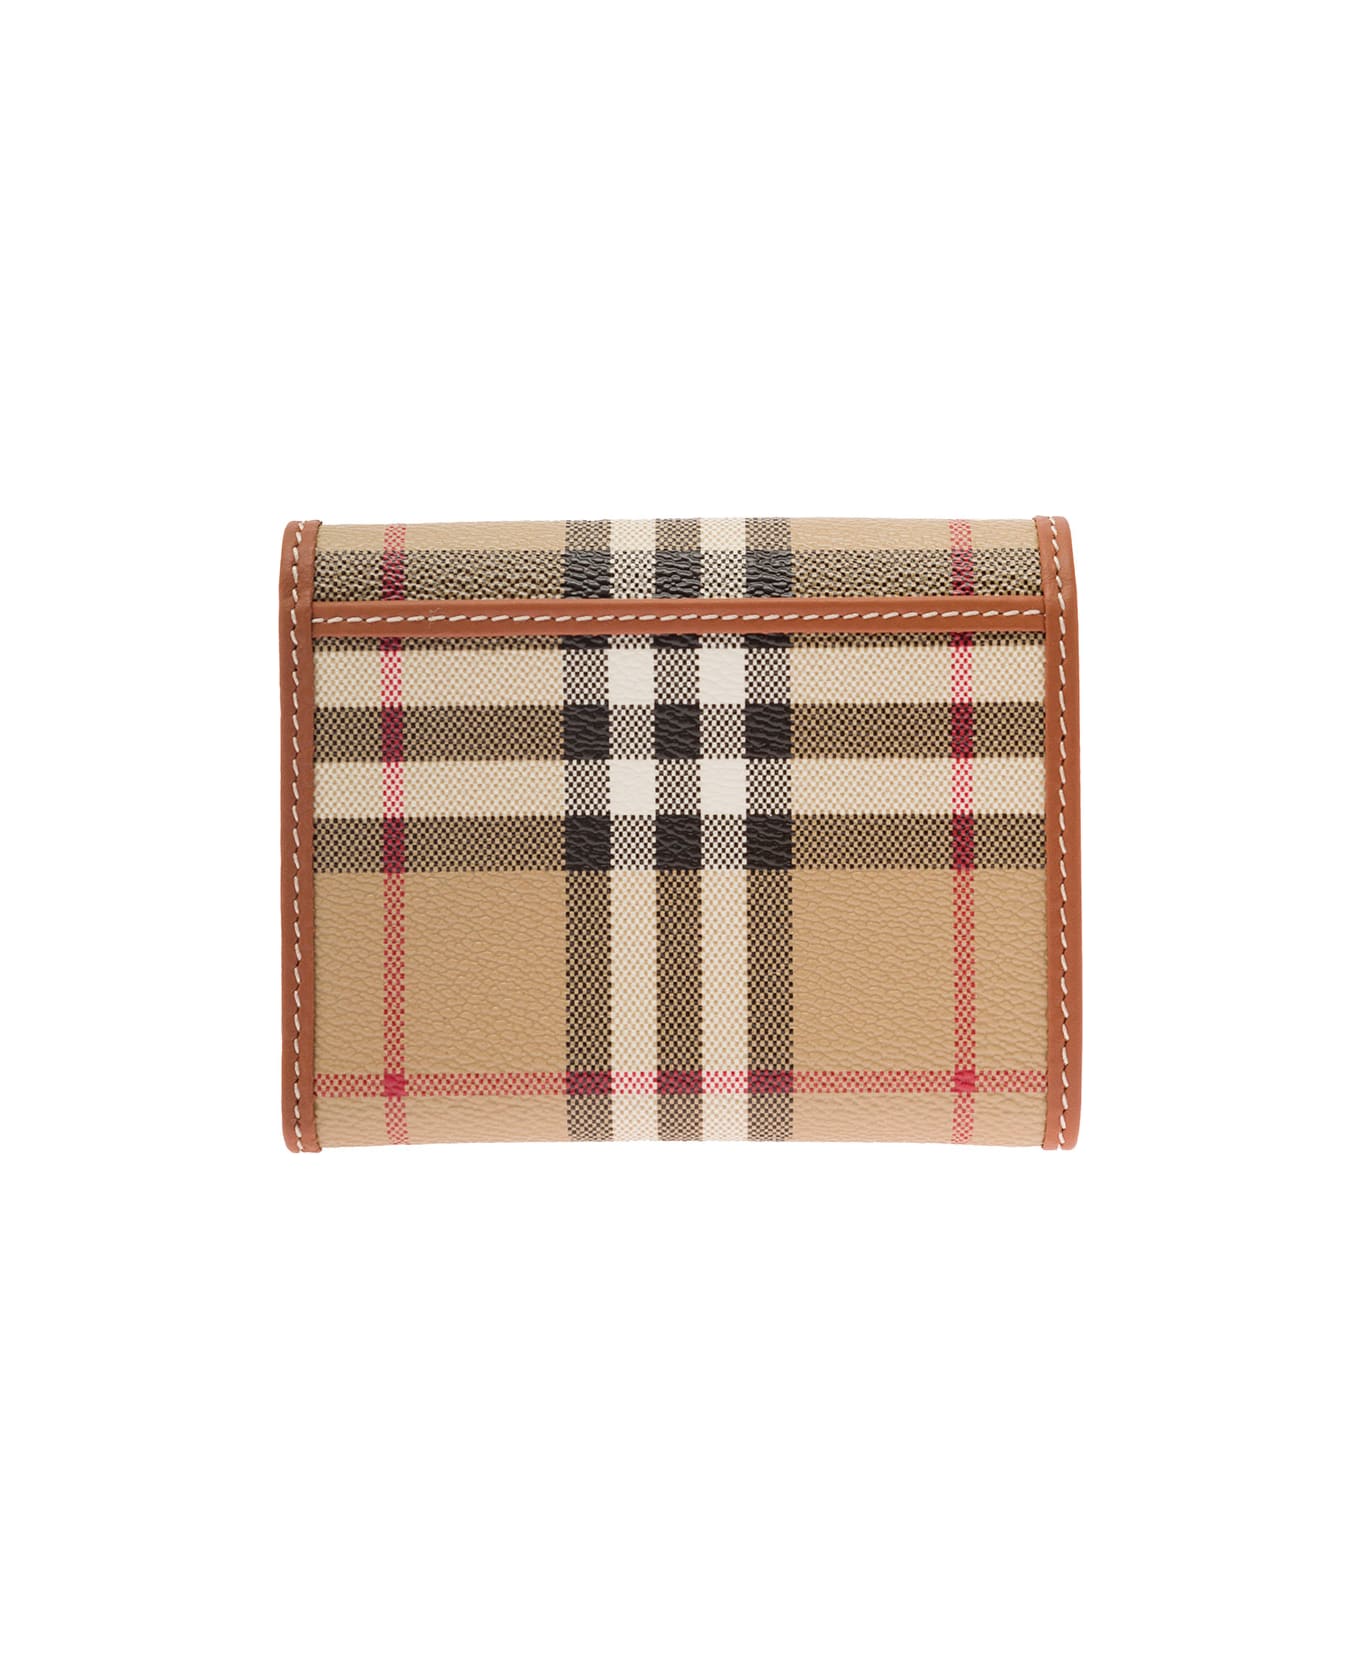 Burberry Leather And Check Wallet - Beige